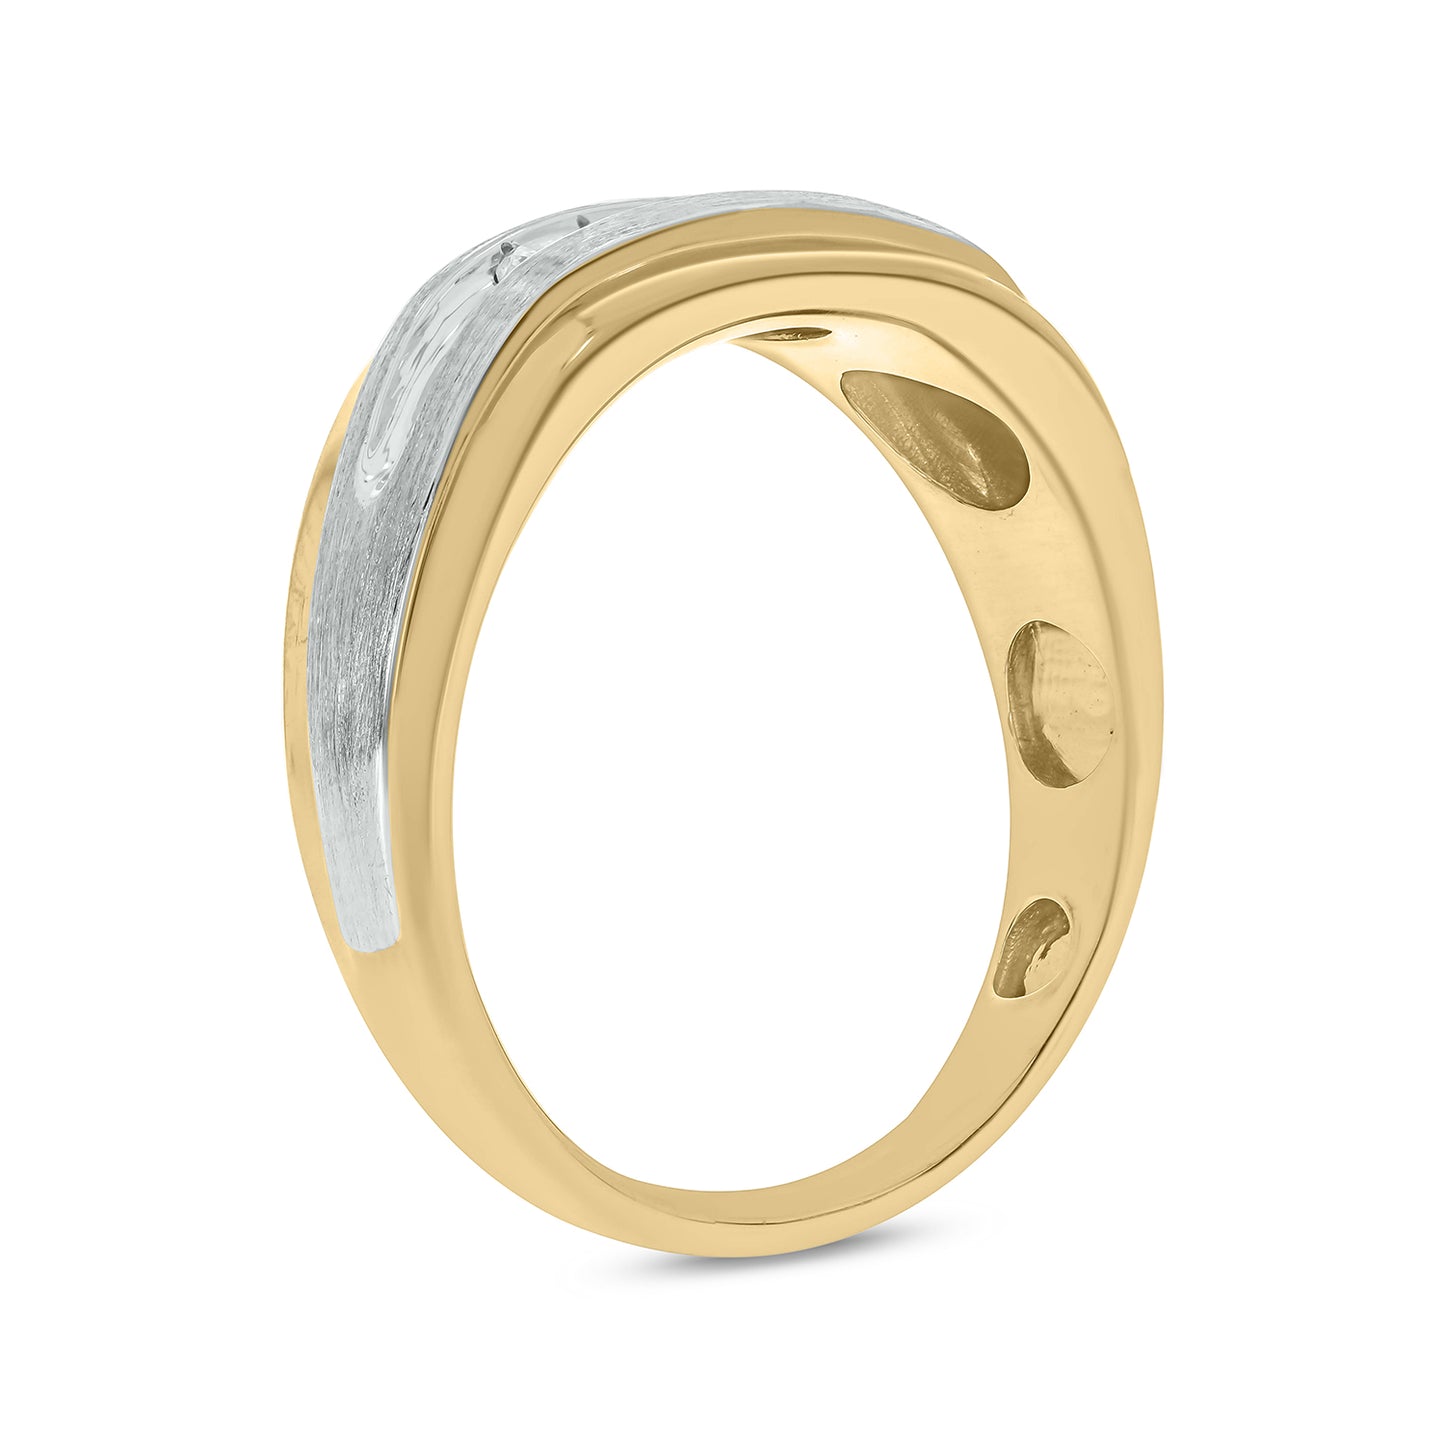 Sophisticated Men's Diamond Band in Gold Plated Sterling Silver